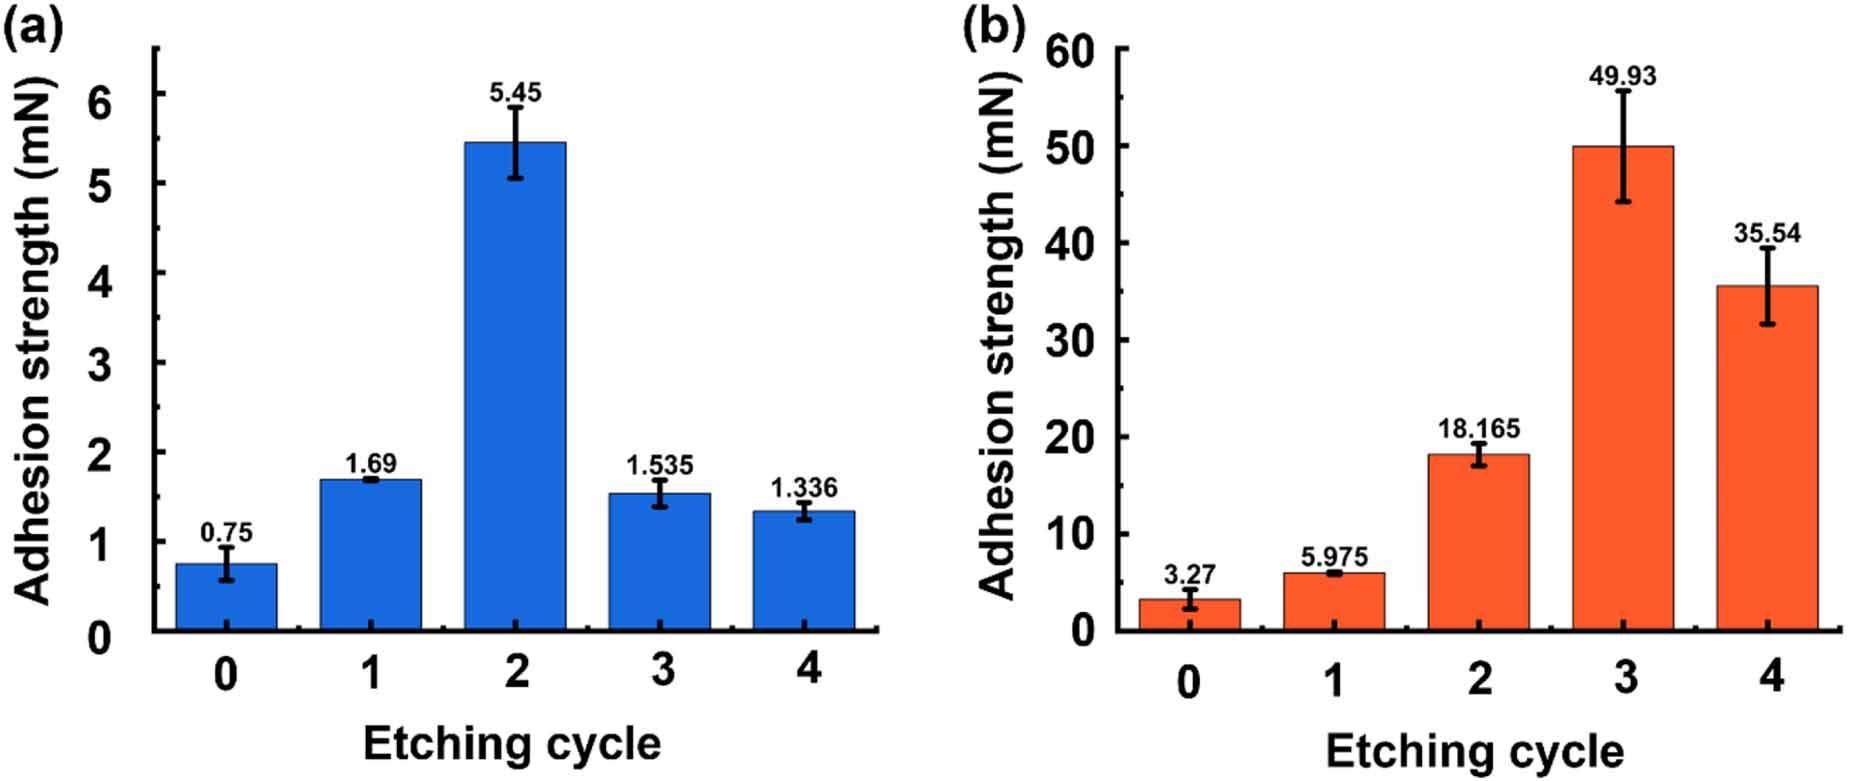 Interfacial adhesion results as a function of different etching cycles. (a) P-M and (b) P-P.